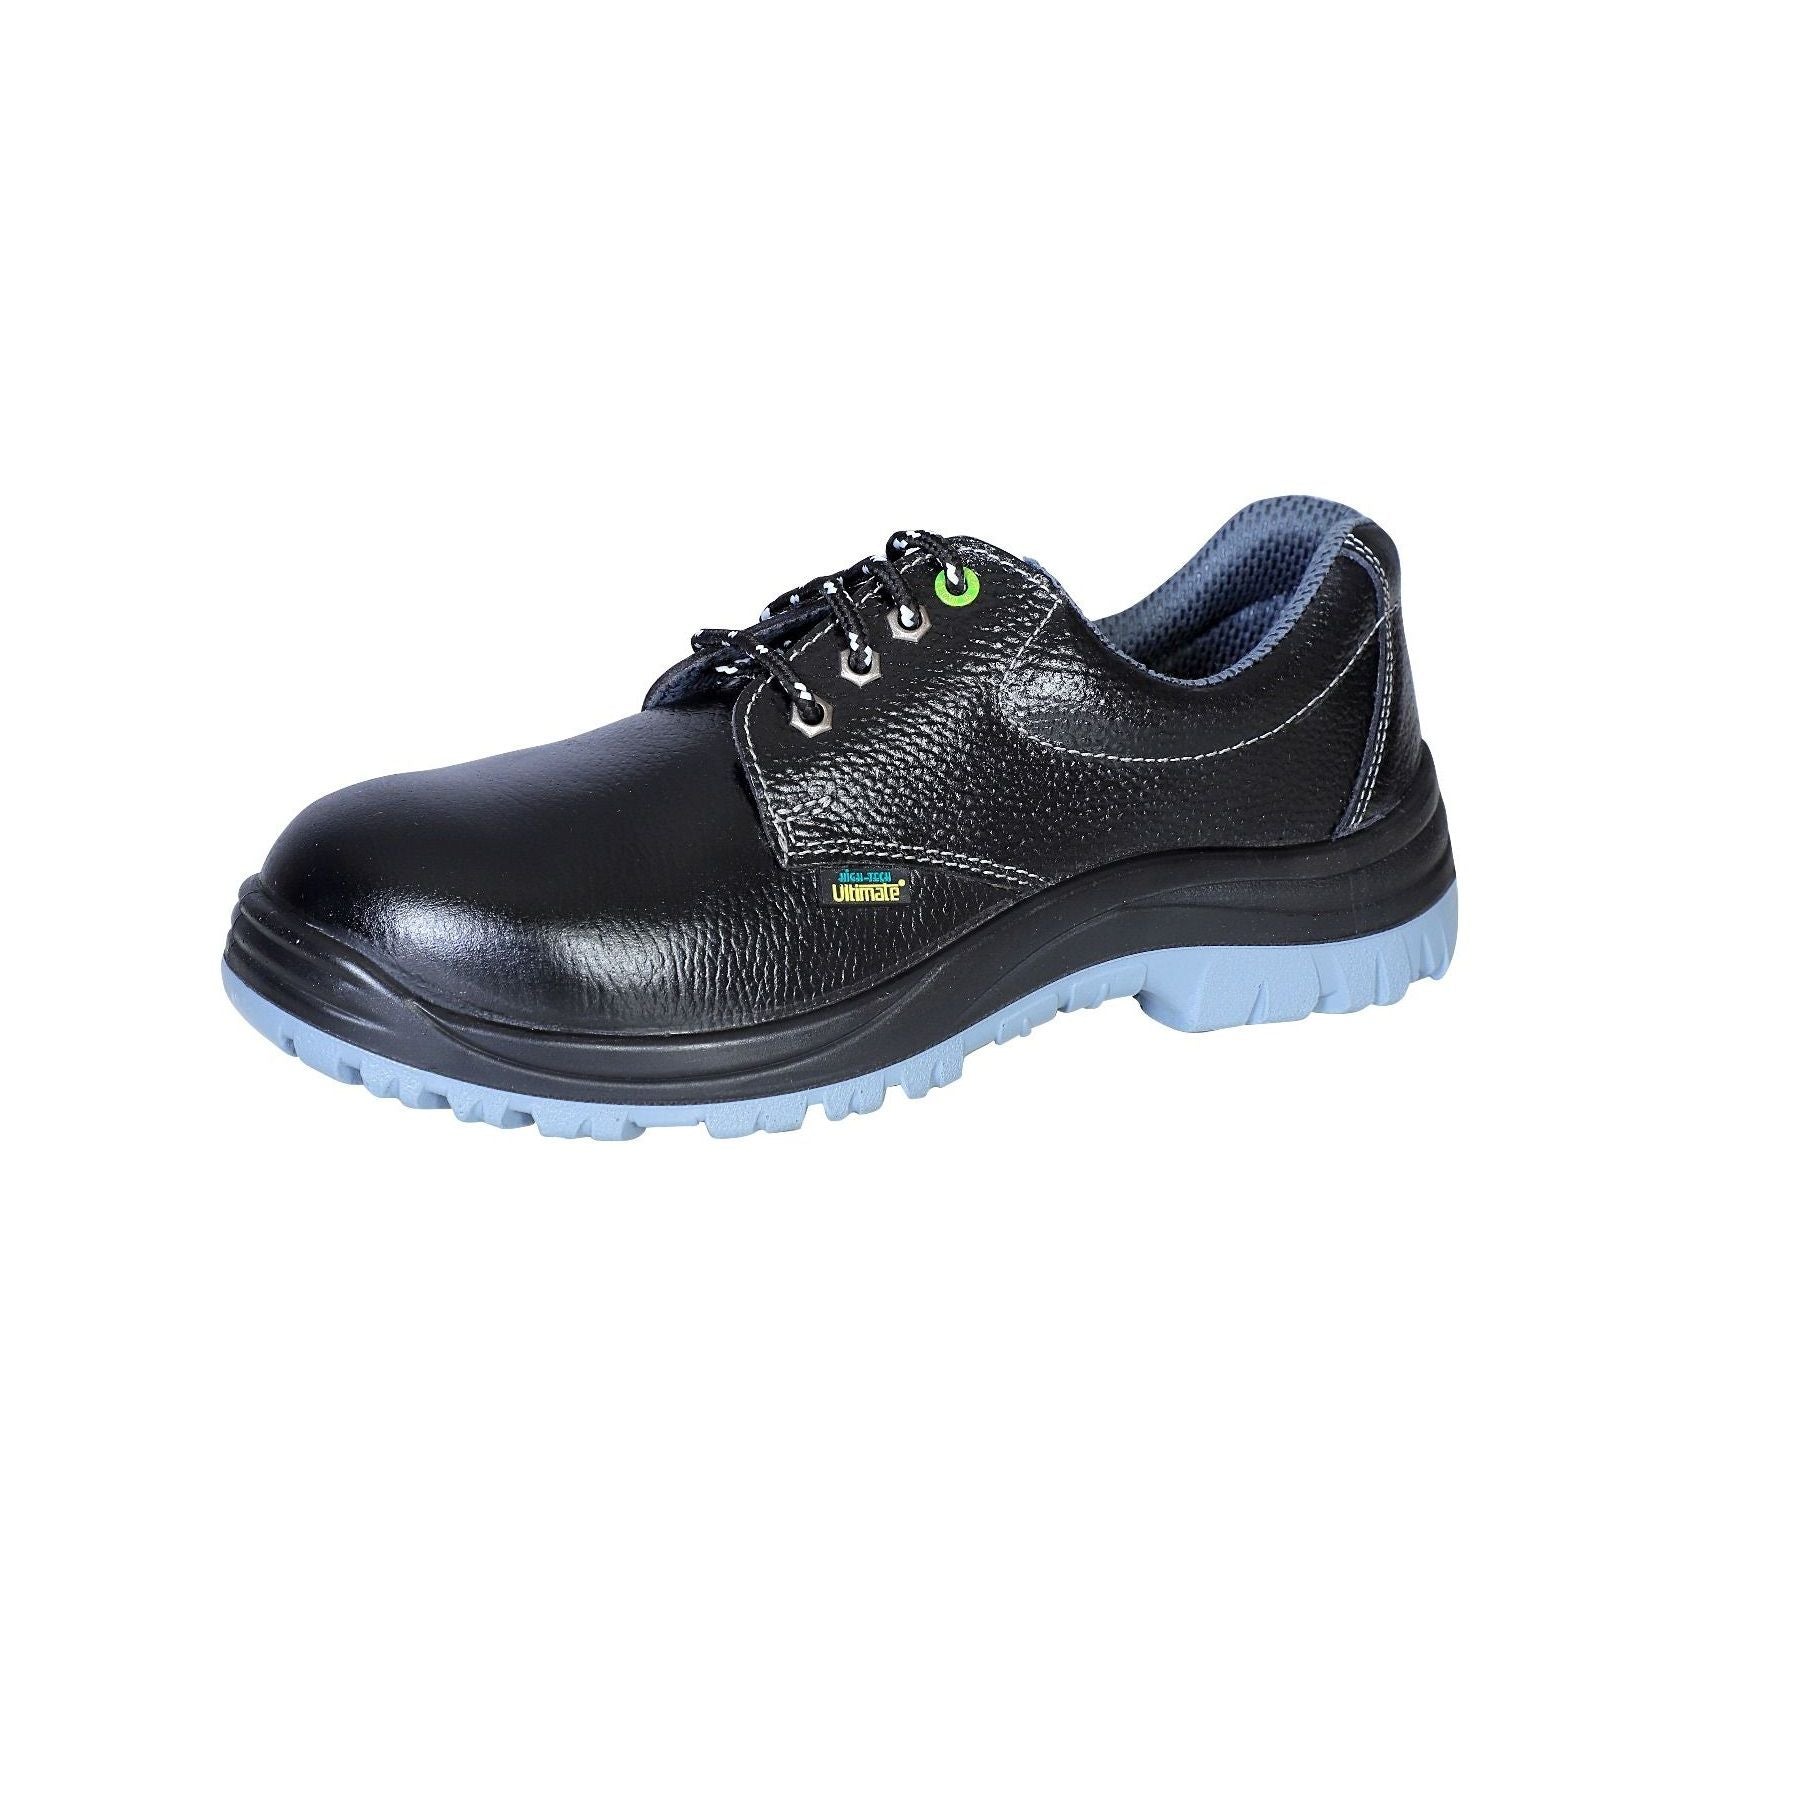 High Tech Genuine Leather Grey Safety Shoes HT-802